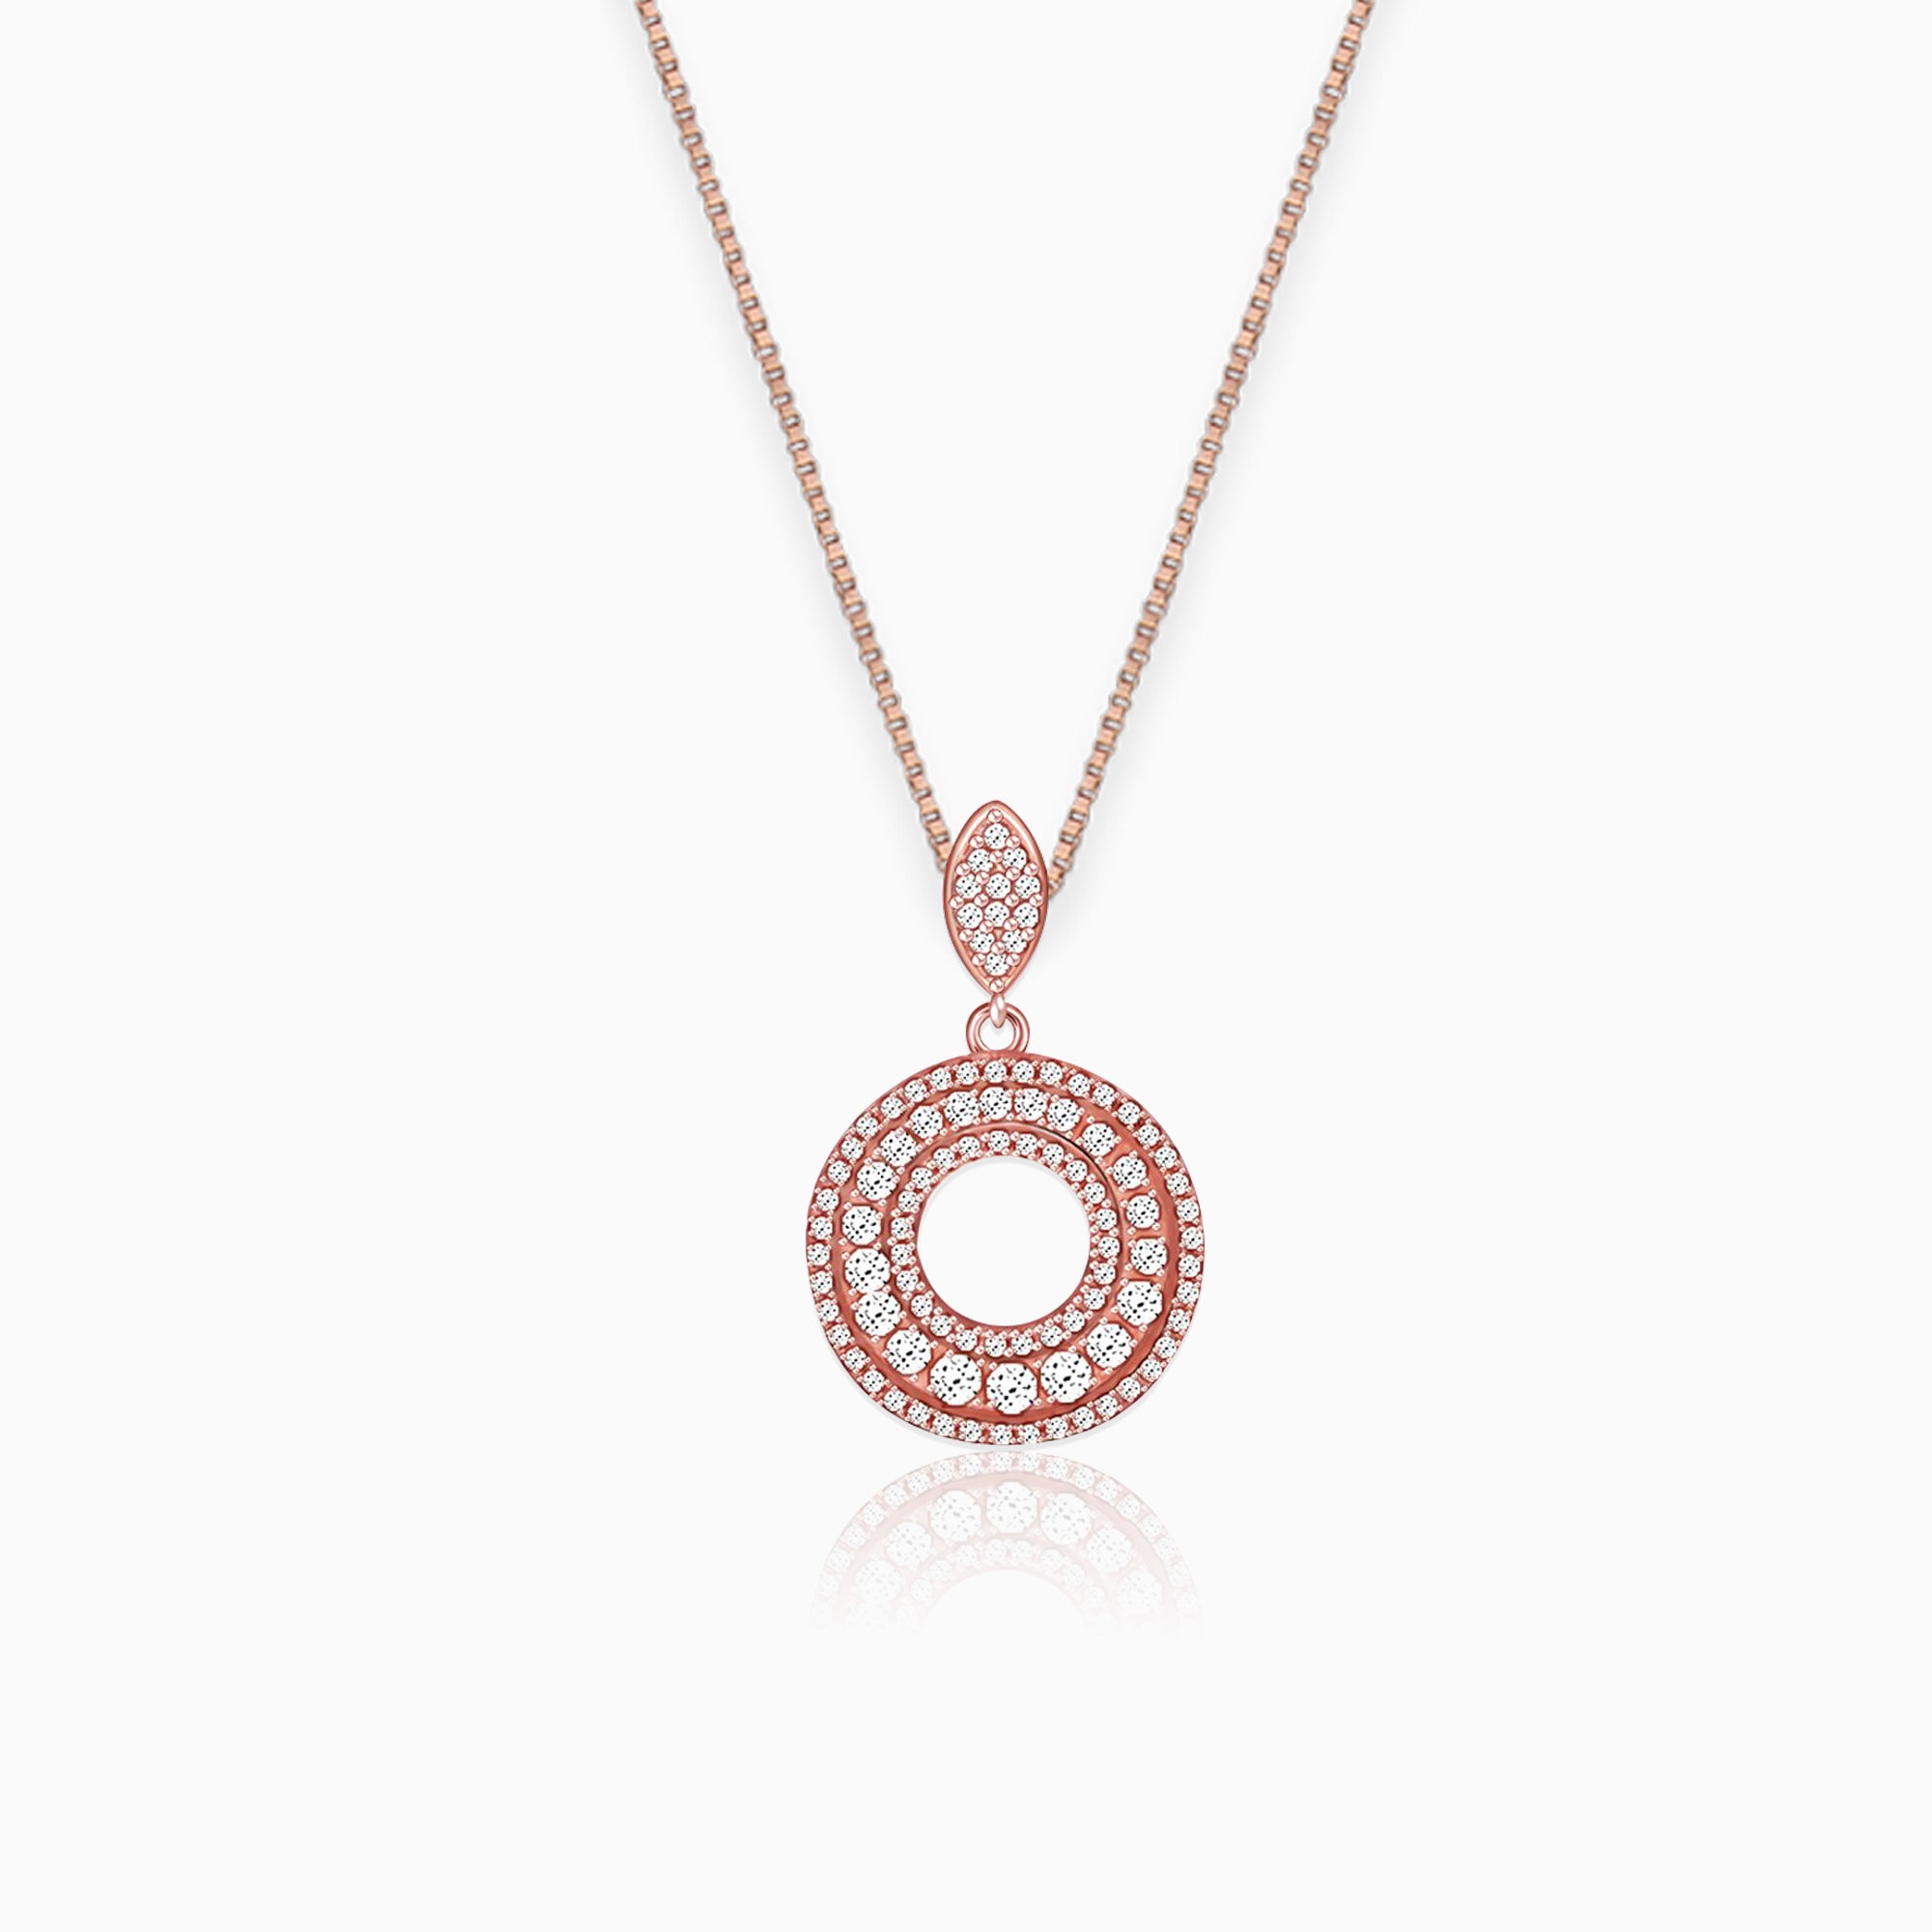 Chatelaine® Pavé Bezel Pendant Necklace in 18K Rose Gold with Morganite and  Diamonds, 9mm | David Yurman